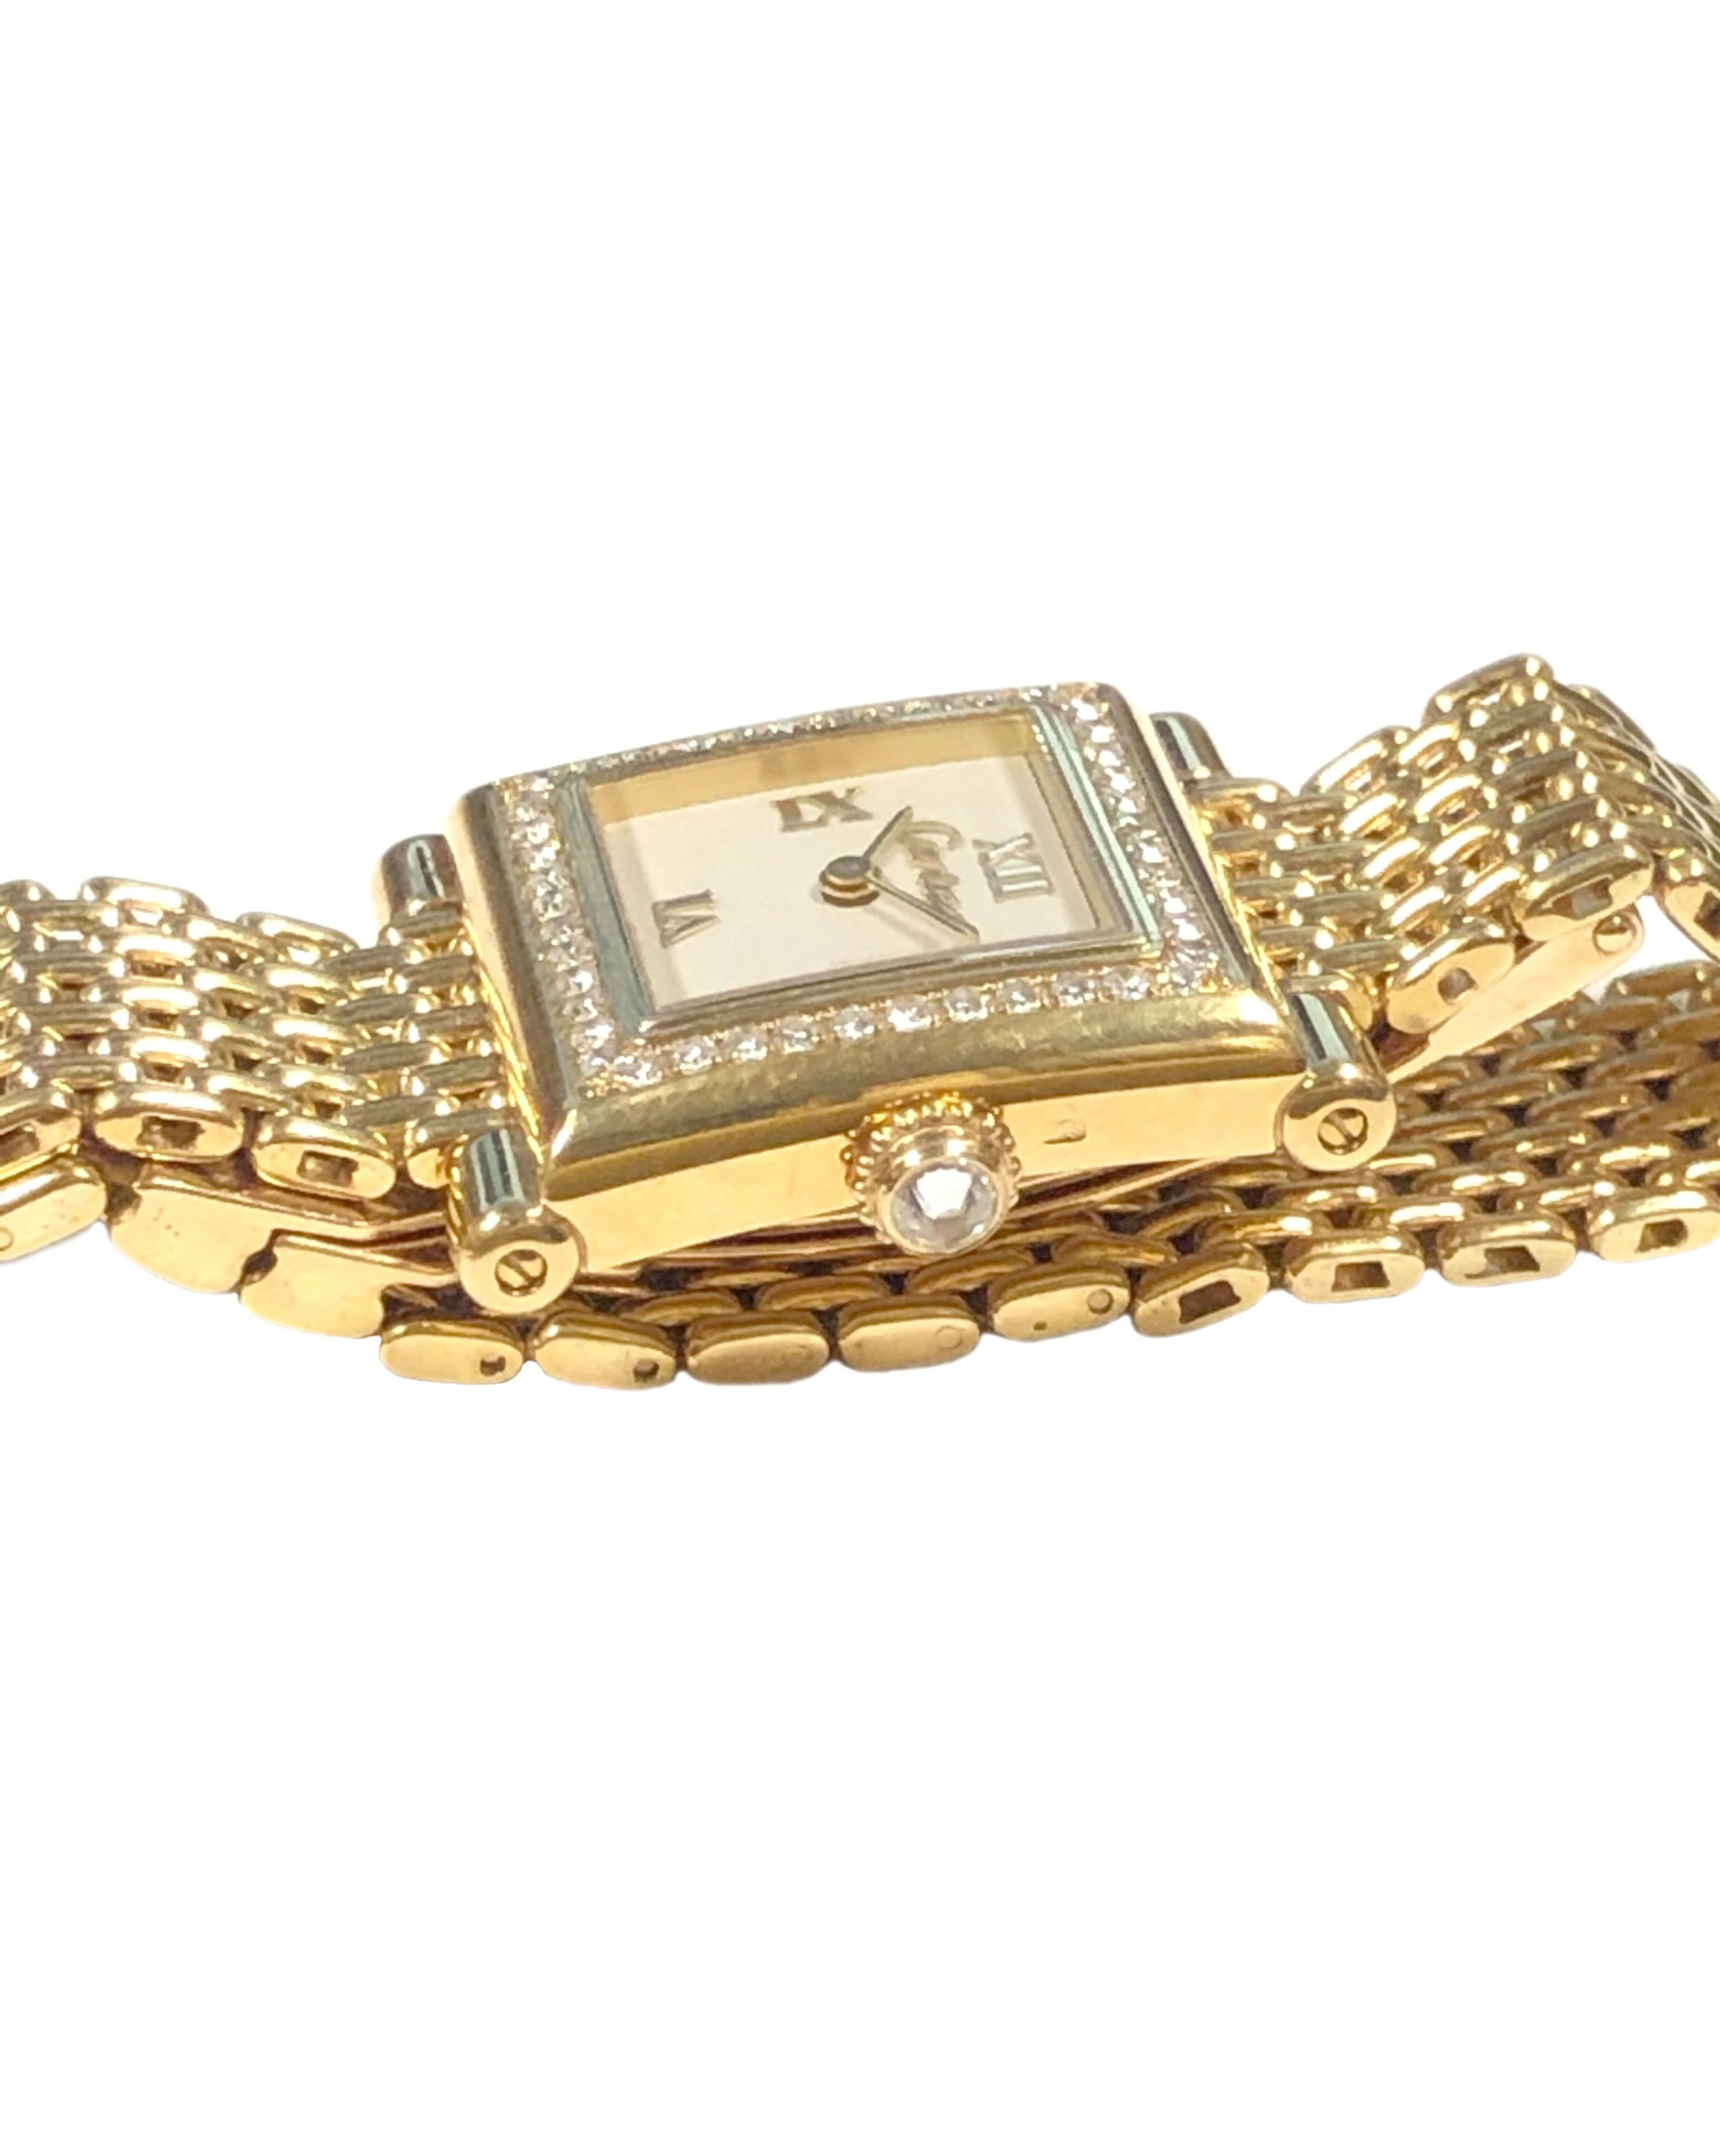 Circa 1987 Cartier Trocadero Ladies Wrist Watch, this model was a very limited offering also called Boutique collection and extremely hard to find. 24 X 20 M.M. 18K Yellow Gold 2 piece case with Diamond set bezel and Diamond set crown. Quartz